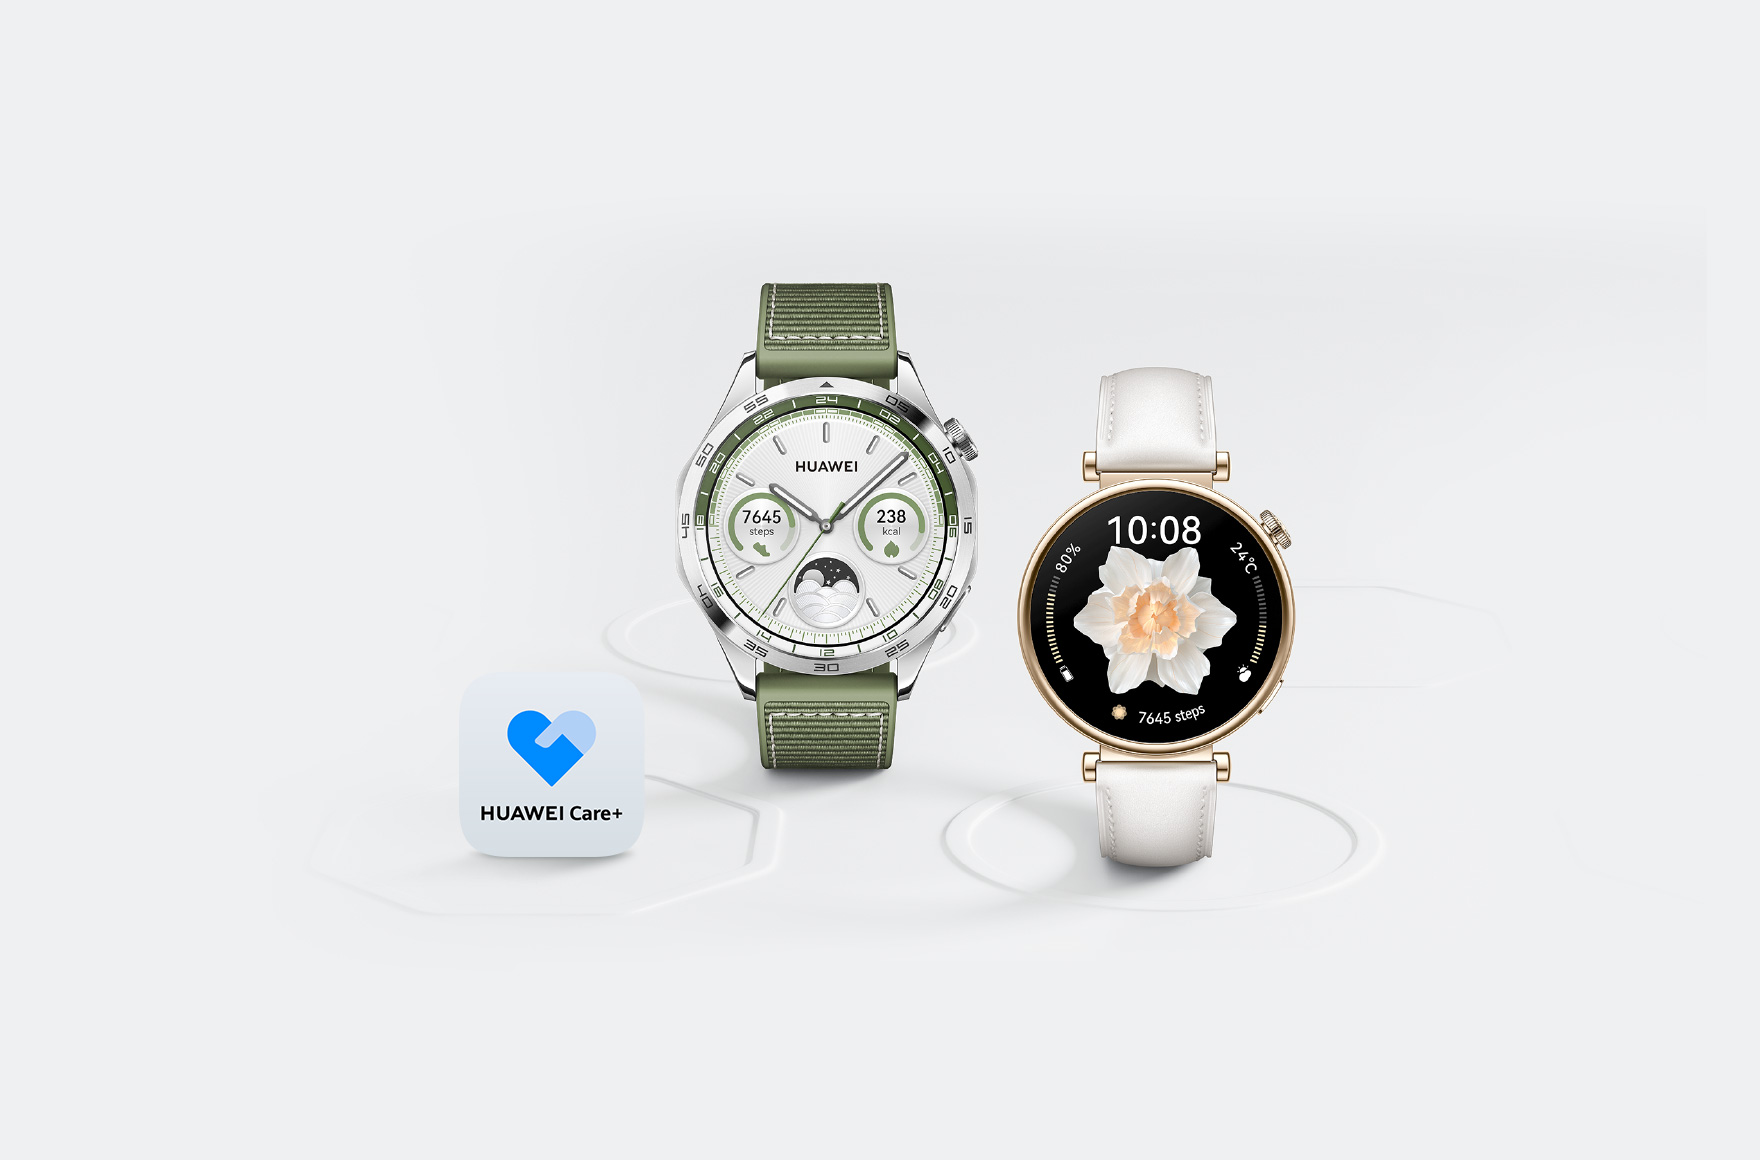 HUAWEI Care+ For WATCH